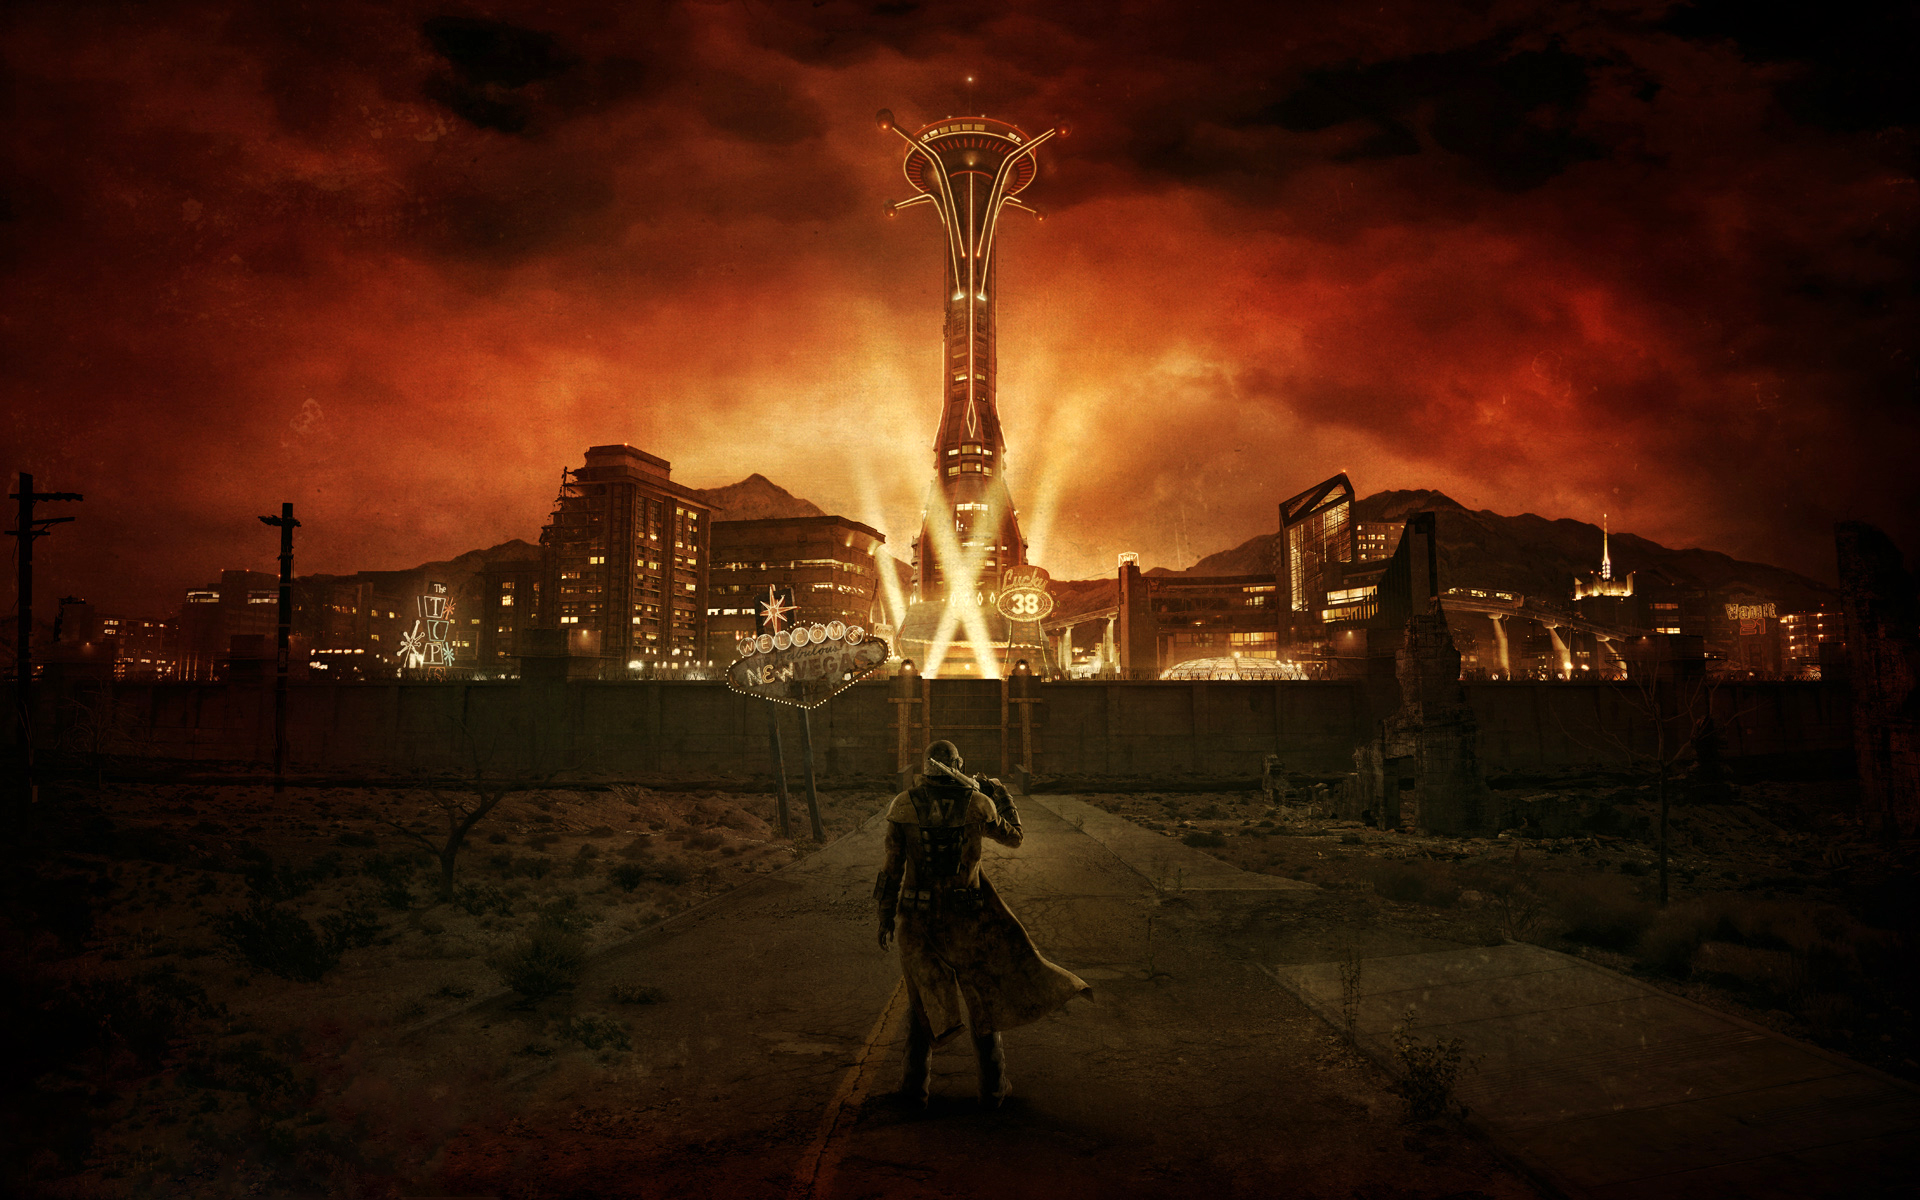 http://img4.wikia.nocookie.net/__cb20110721063233/fallout/images/a/a3/Ranger_at_New_Vegas_entrance.jpg